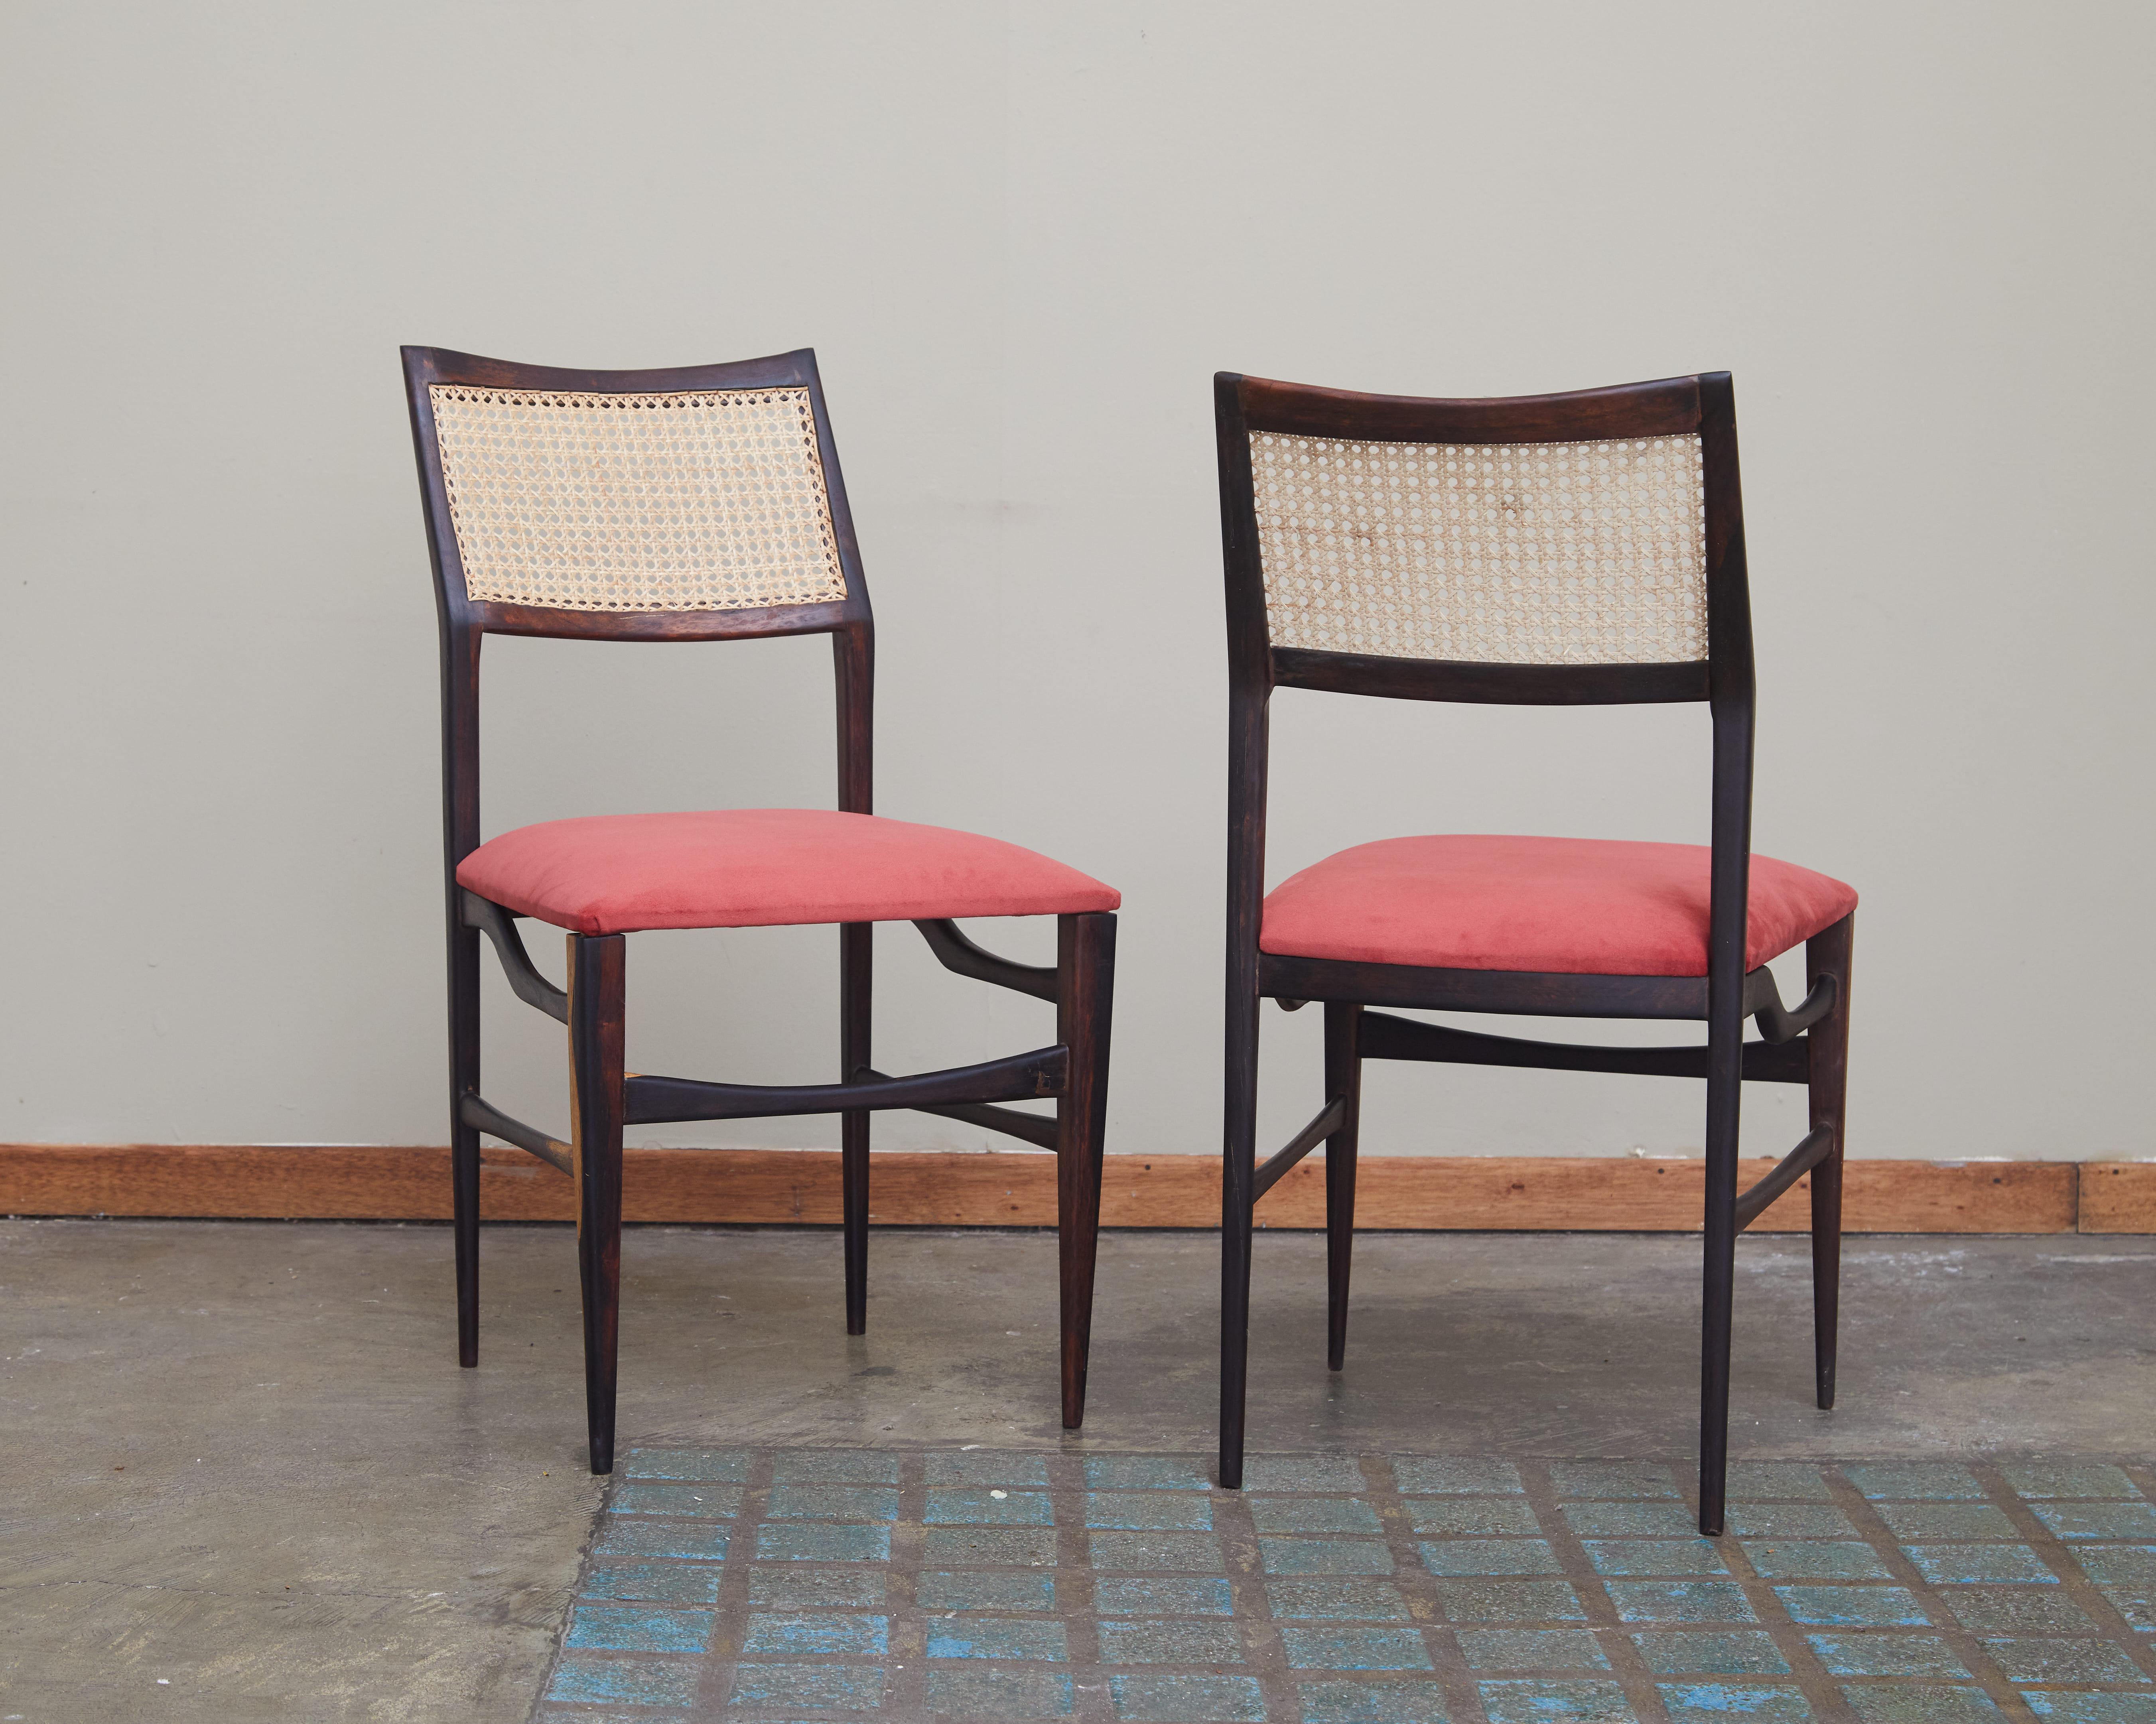 Brazilian midcentury upholstered set of 2 chairs in rosewood and natural plaited cane attributed to Joaquim Tenreiro, who was the great precursor of modern furniture in Brazil, masterfully using brazilian wood to produce furniture that represented